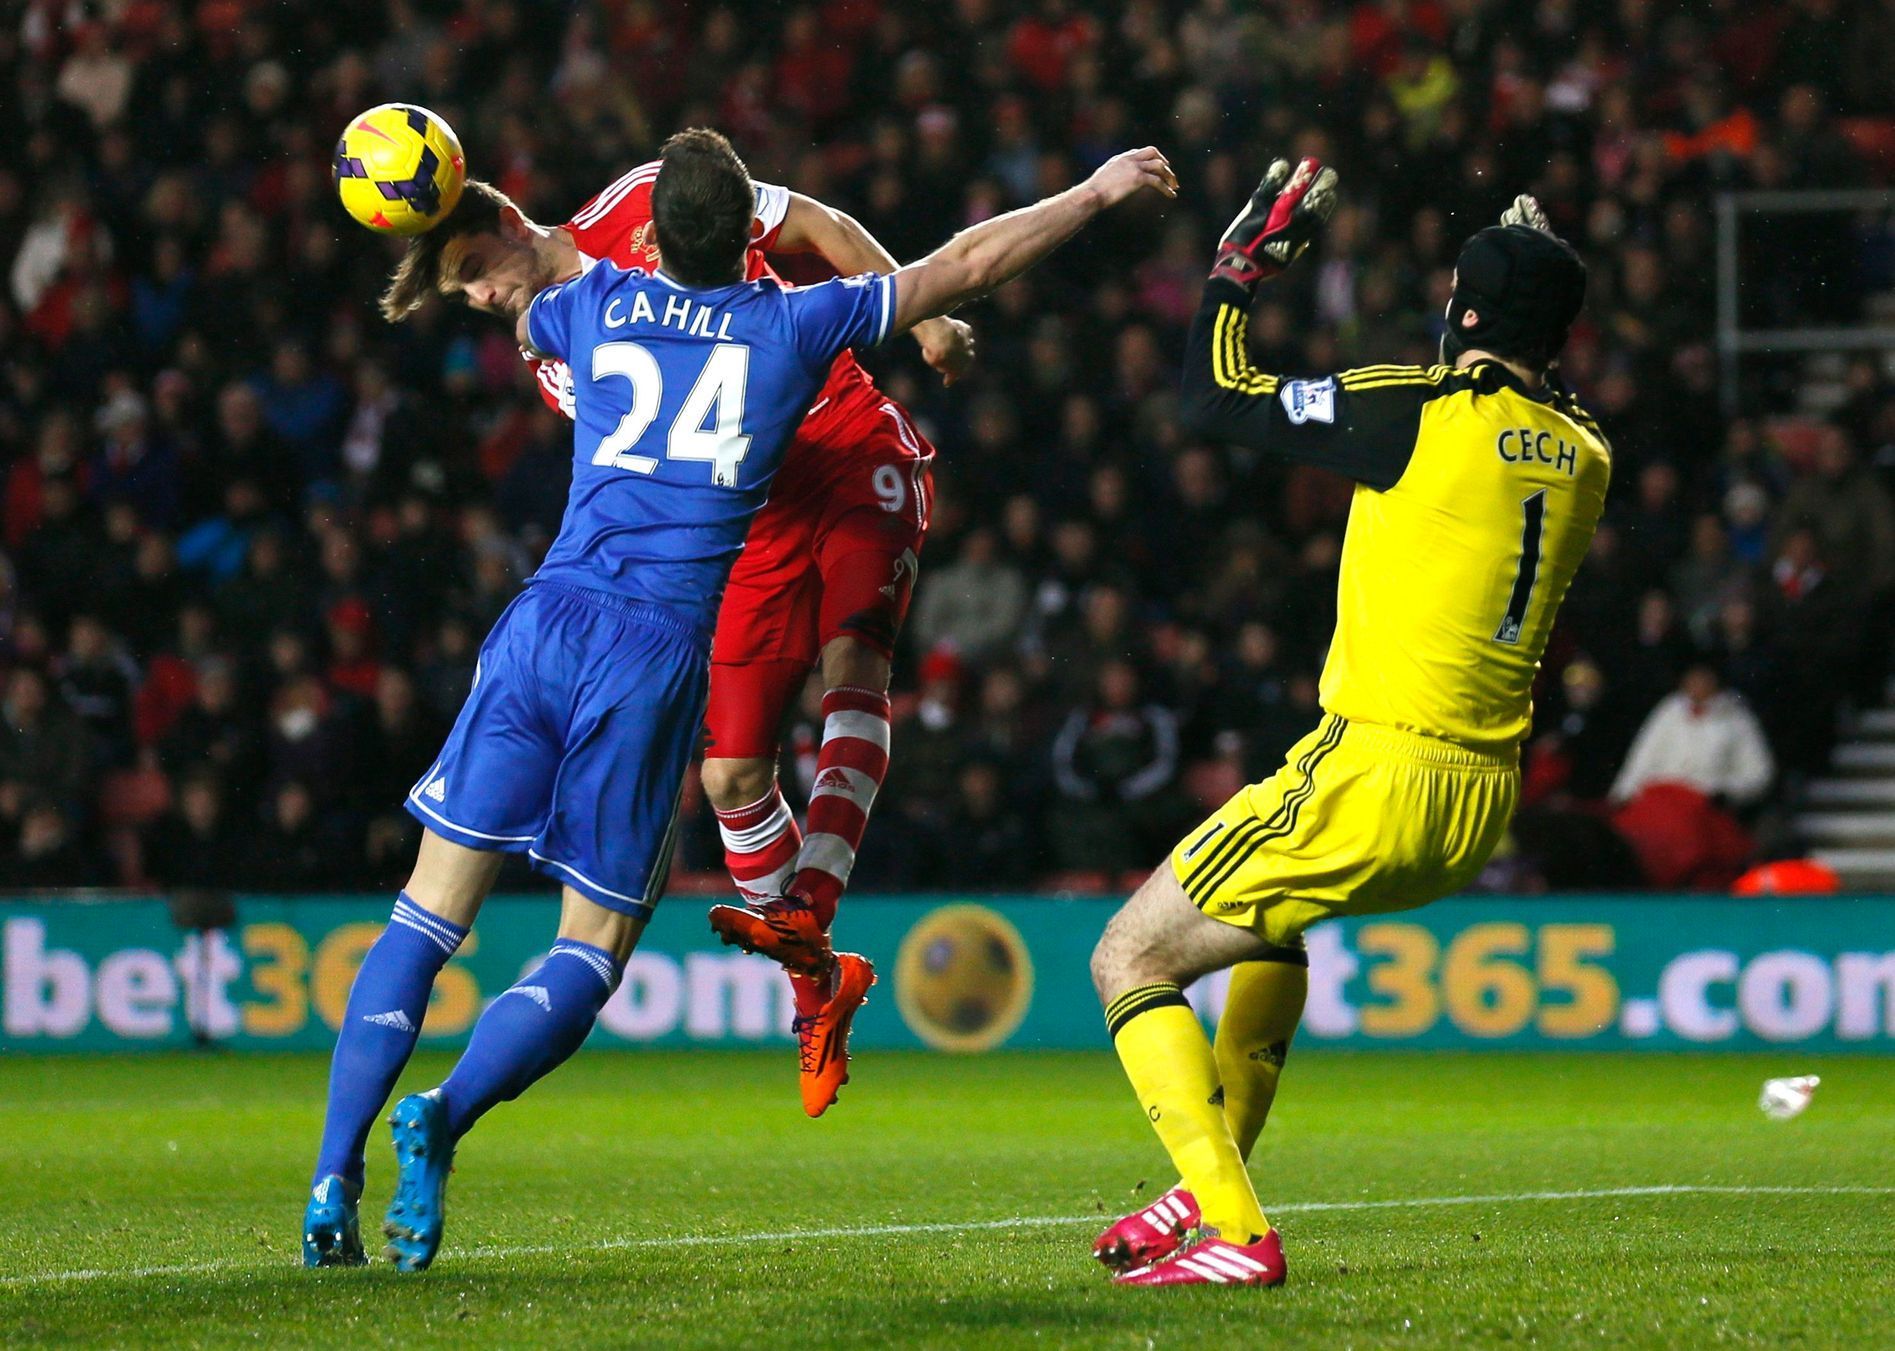 Southampton's Rodriguez challenges Chelsea's Cahill and Cech in Southampton